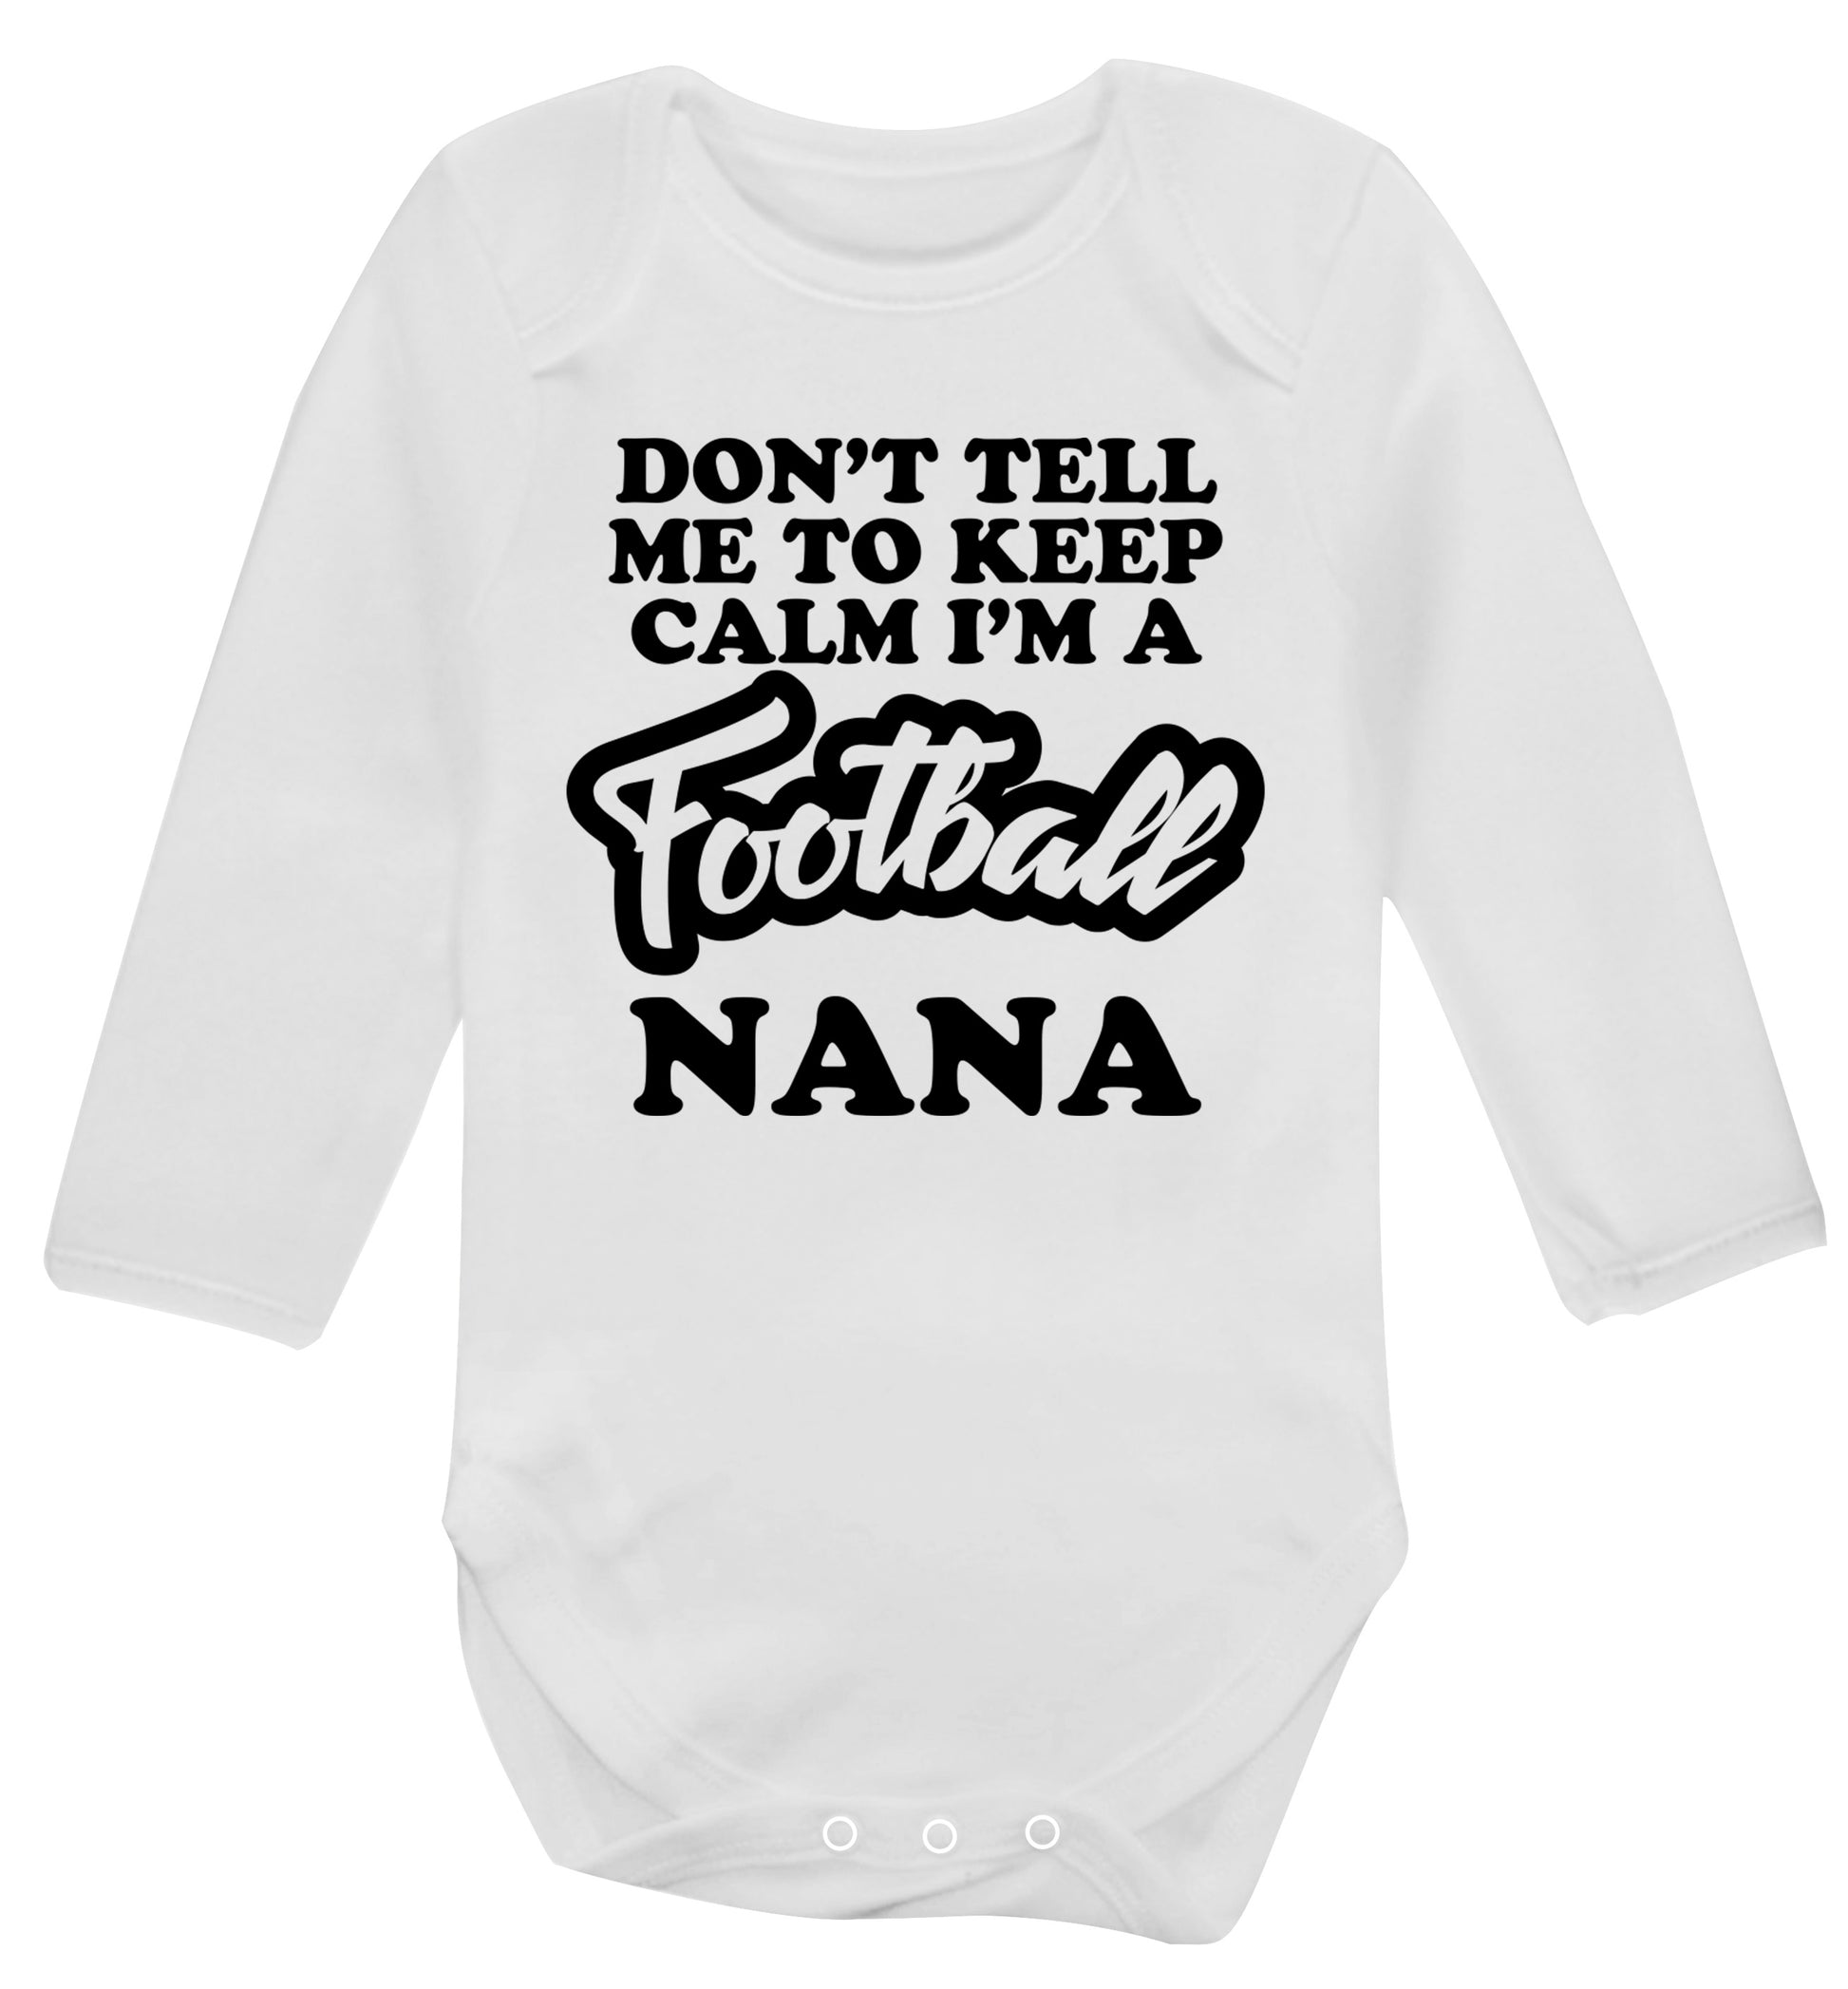 Don't tell me to keep calm I'm a football nana Baby Vest long sleeved white 6-12 months